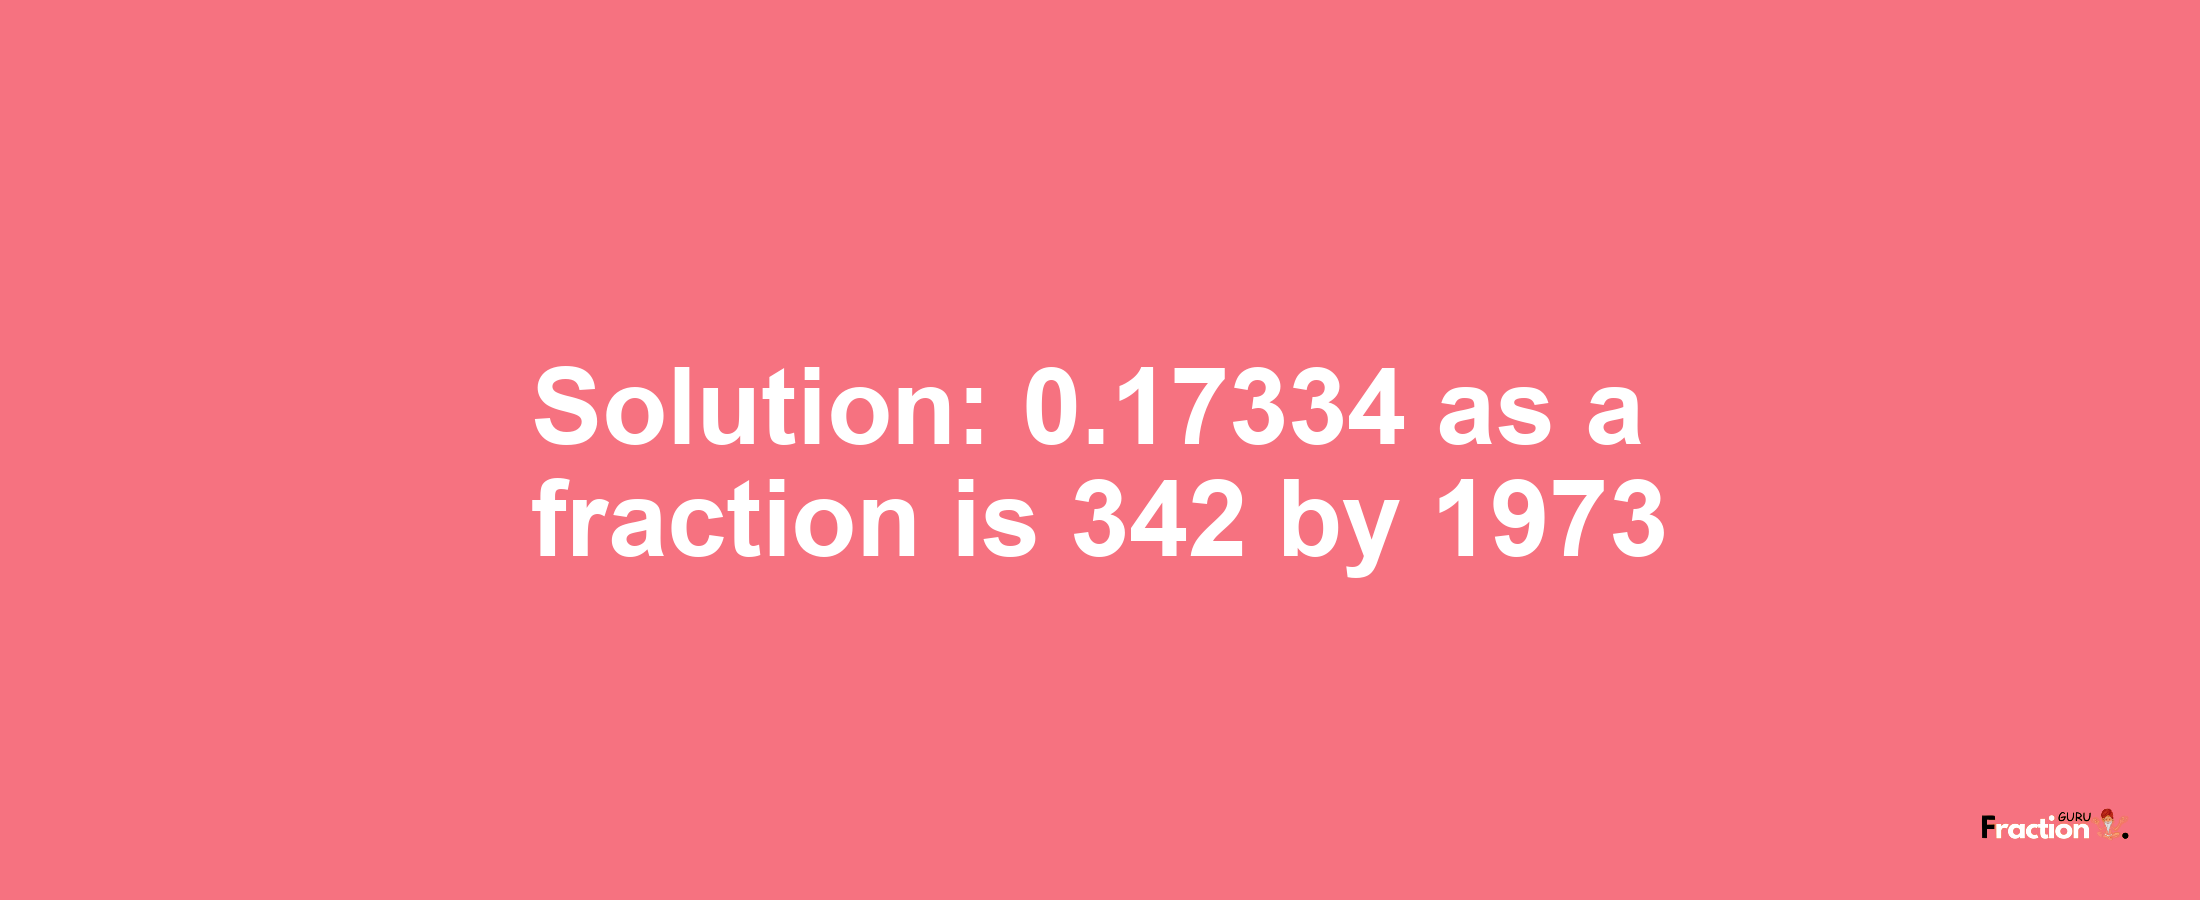 Solution:0.17334 as a fraction is 342/1973